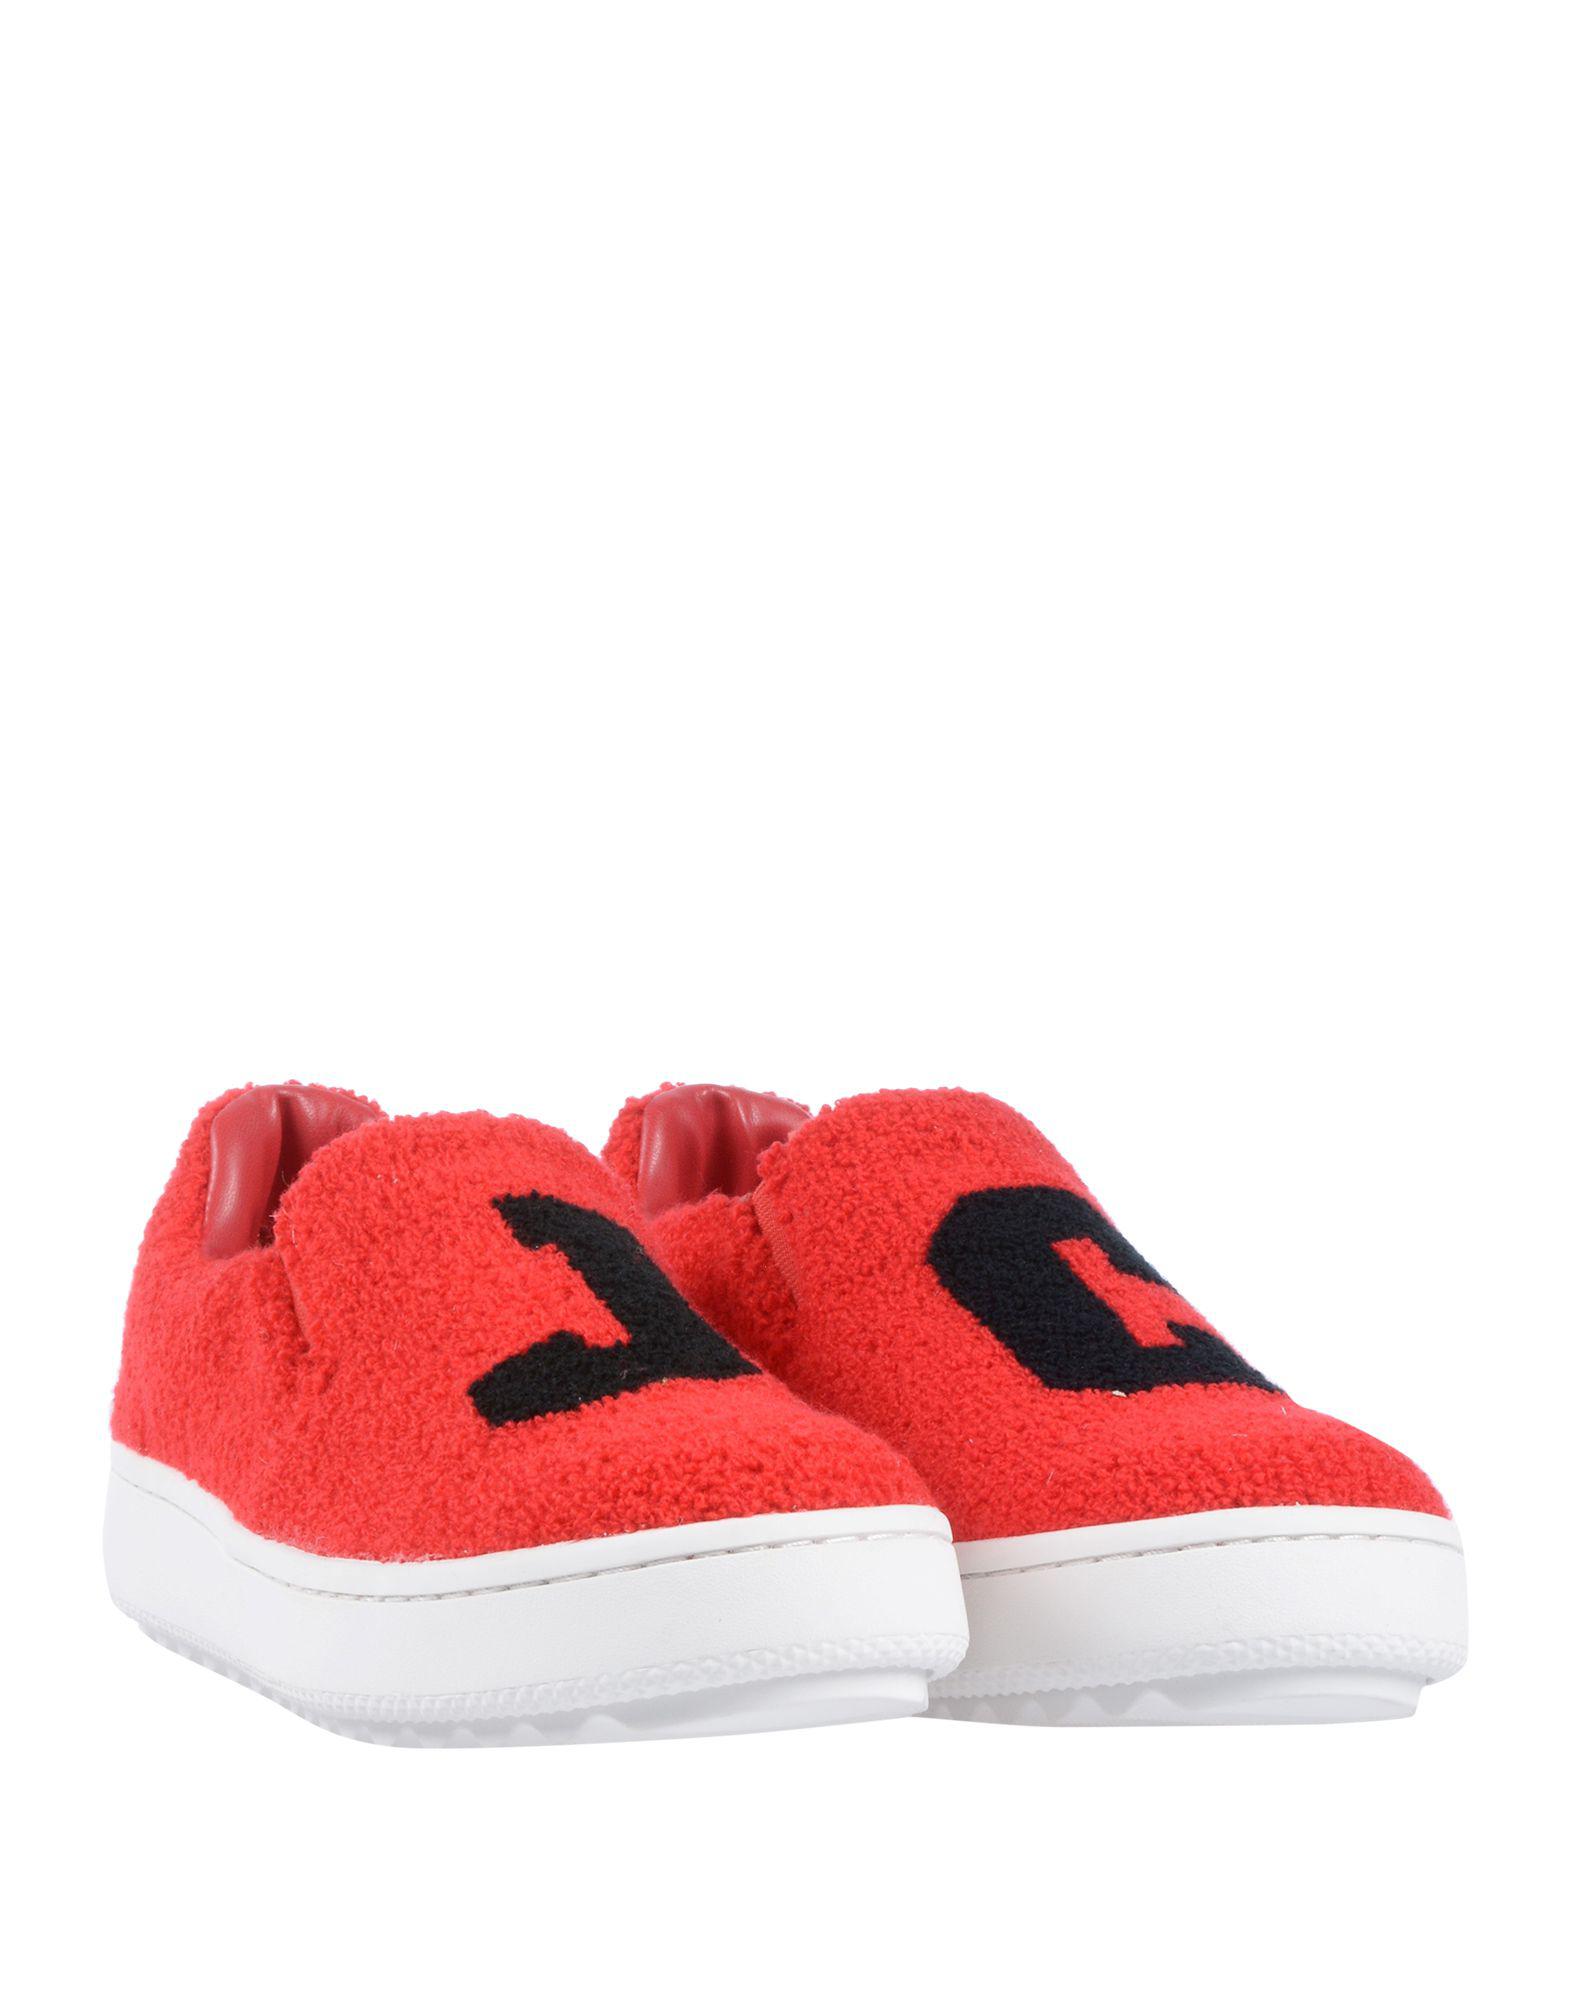 Juicy Couture Low-tops & Sneakers in Red - Lyst